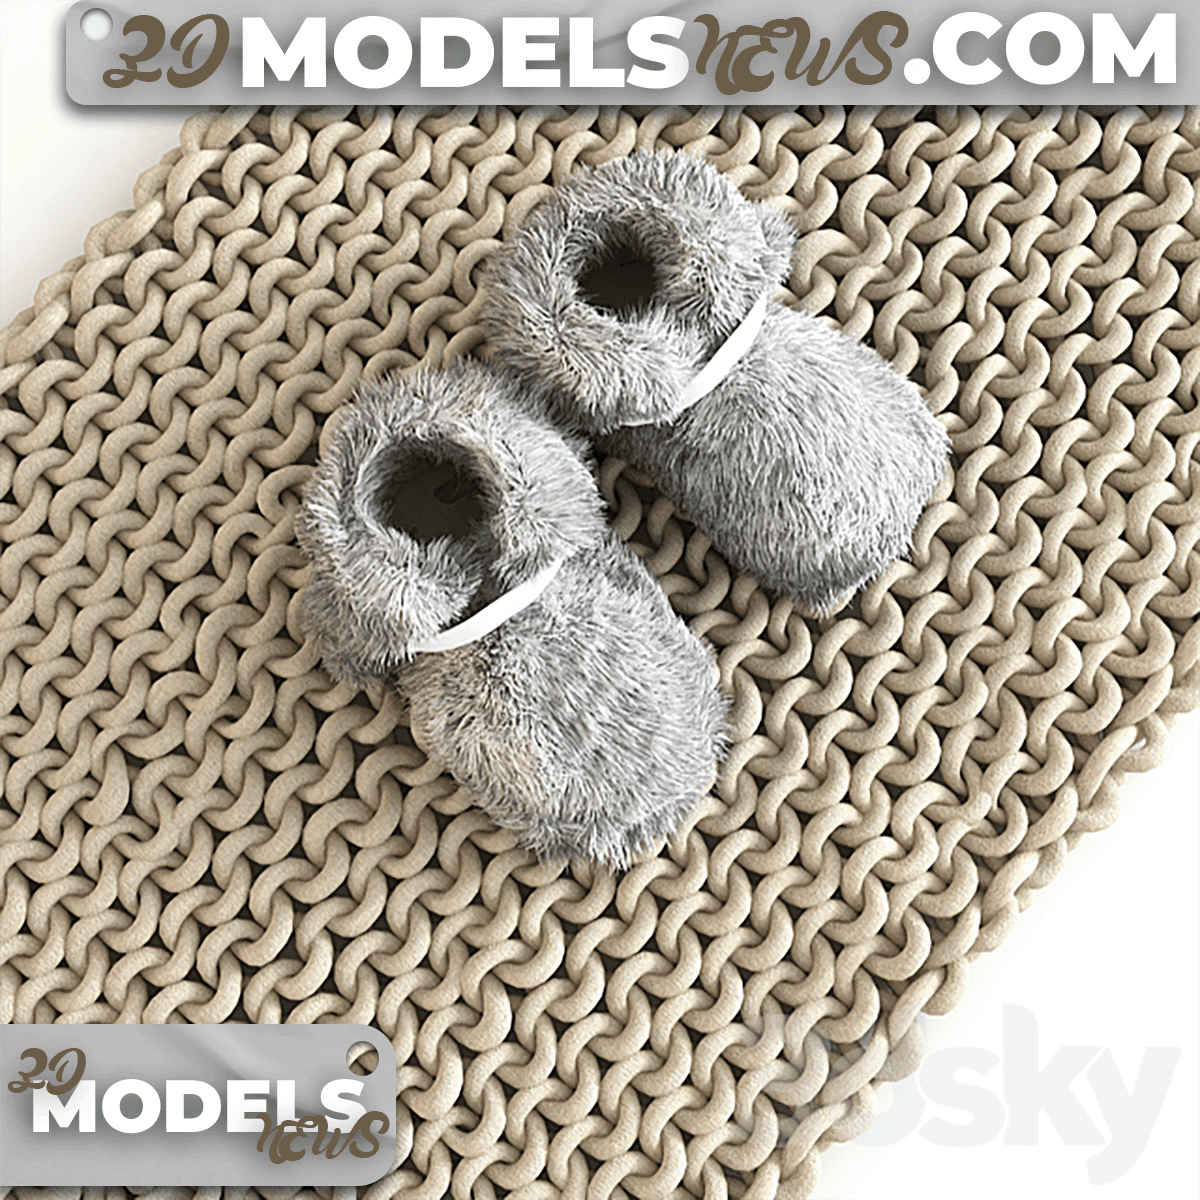 Carpet and Slippers Model A1 3